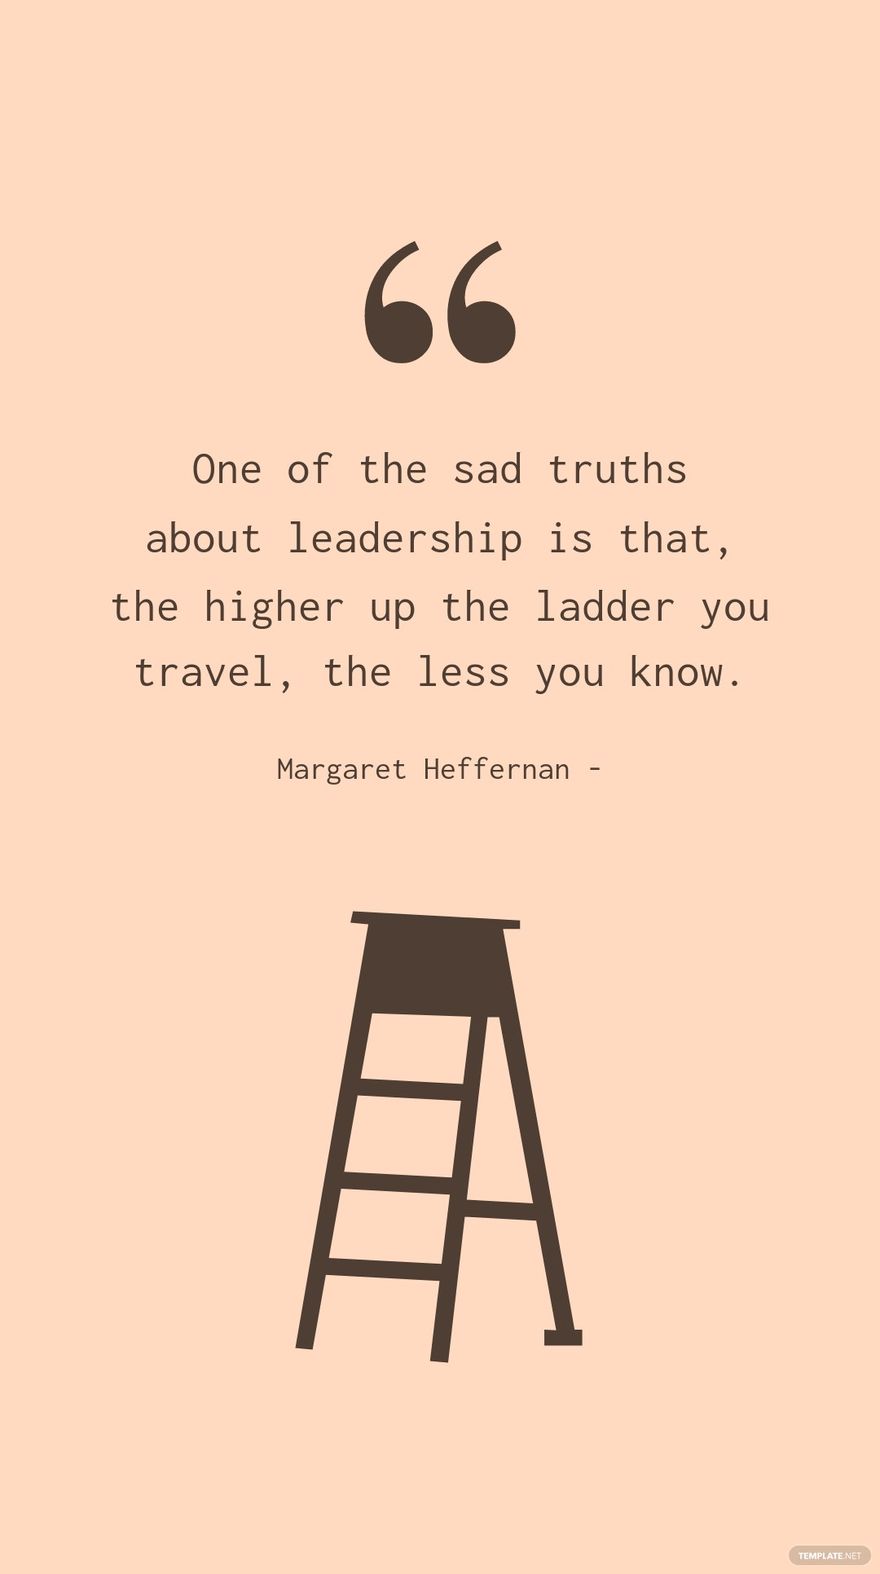 Free Margaret Heffernan - One of the sad truths about leadership is that, the higher up the ladder you travel, the less you know. in JPG